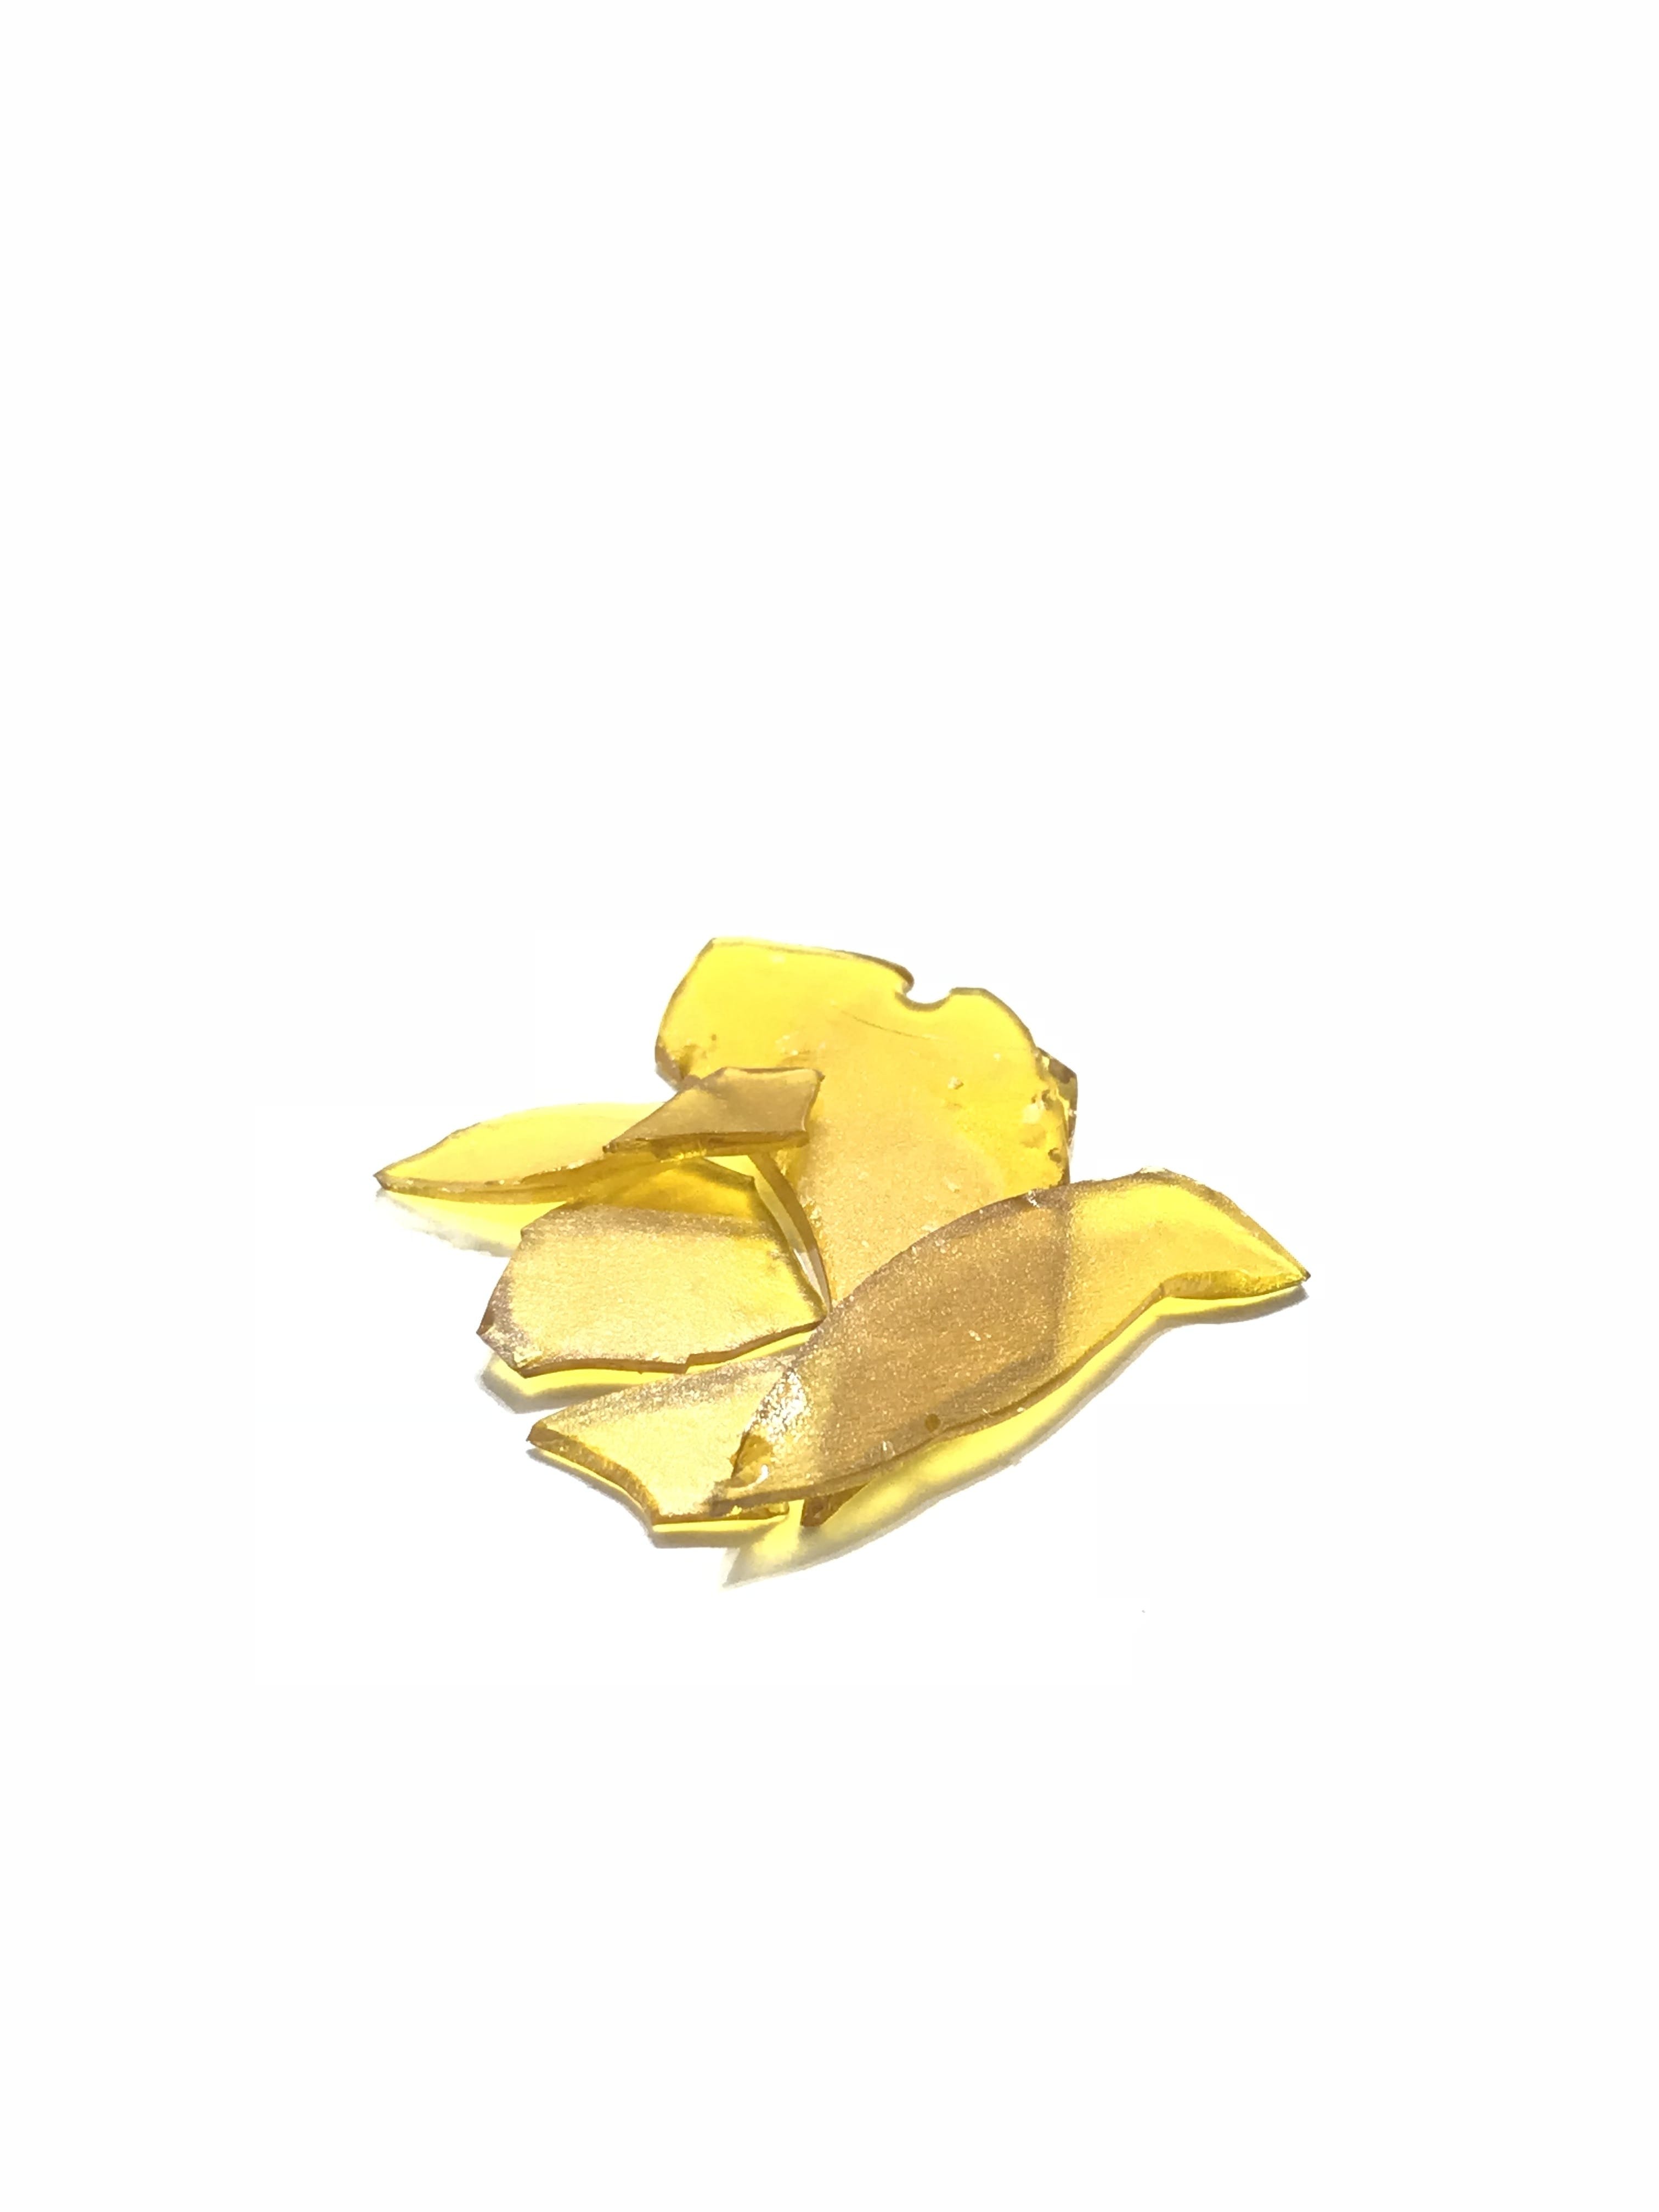 concentrate-concentrate-supply-co-cannatonic-shatter-non-members